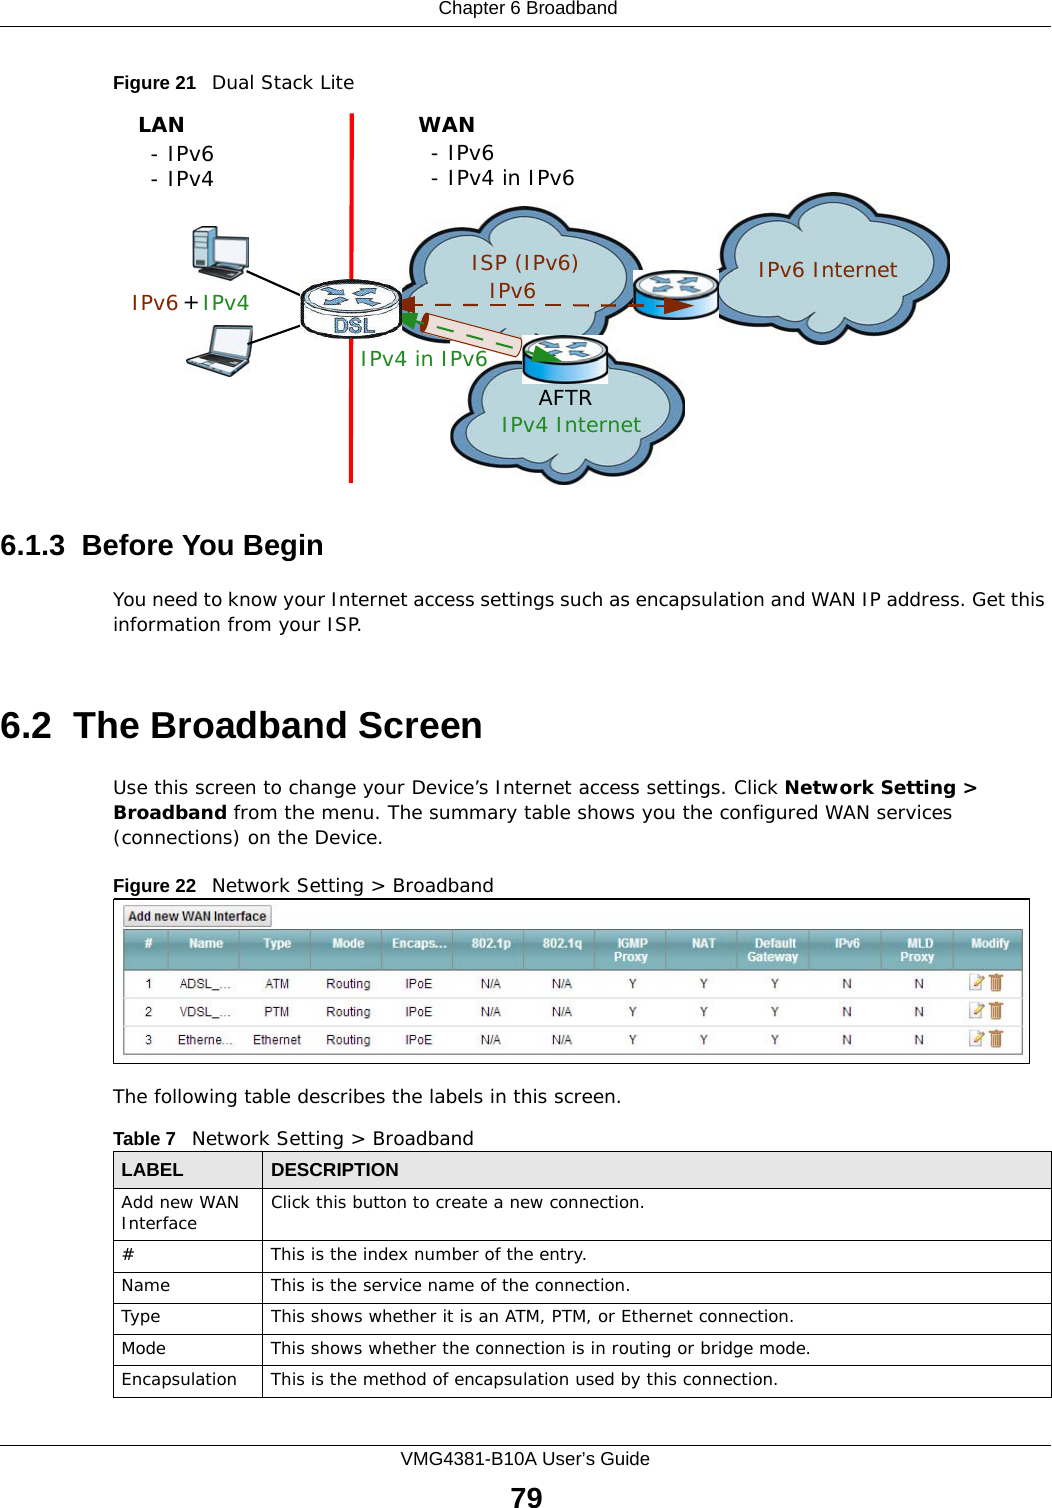  Chapter 6 BroadbandVMG4381-B10A User’s Guide79Figure 21   Dual Stack Lite6.1.3  Before You BeginYou need to know your Internet access settings such as encapsulation and WAN IP address. Get this information from your ISP.6.2  The Broadband ScreenUse this screen to change your Device’s Internet access settings. Click Network Setting &gt; Broadband from the menu. The summary table shows you the configured WAN services (connections) on the Device.Figure 22   Network Setting &gt; Broadband The following table describes the labels in this screen. ISP (IPv6) IPv6 Internet IPv6 AFTRIPv4 in IPv6IPv4 InternetIPv6  IPv4 +LAN- IPv6- IPv4WAN- IPv6- IPv4 in IPv6Table 7   Network Setting &gt; BroadbandLABEL DESCRIPTIONAdd new WAN Interface Click this button to create a new connection.# This is the index number of the entry.Name This is the service name of the connection.Type This shows whether it is an ATM, PTM, or Ethernet connection.Mode This shows whether the connection is in routing or bridge mode.Encapsulation This is the method of encapsulation used by this connection. 